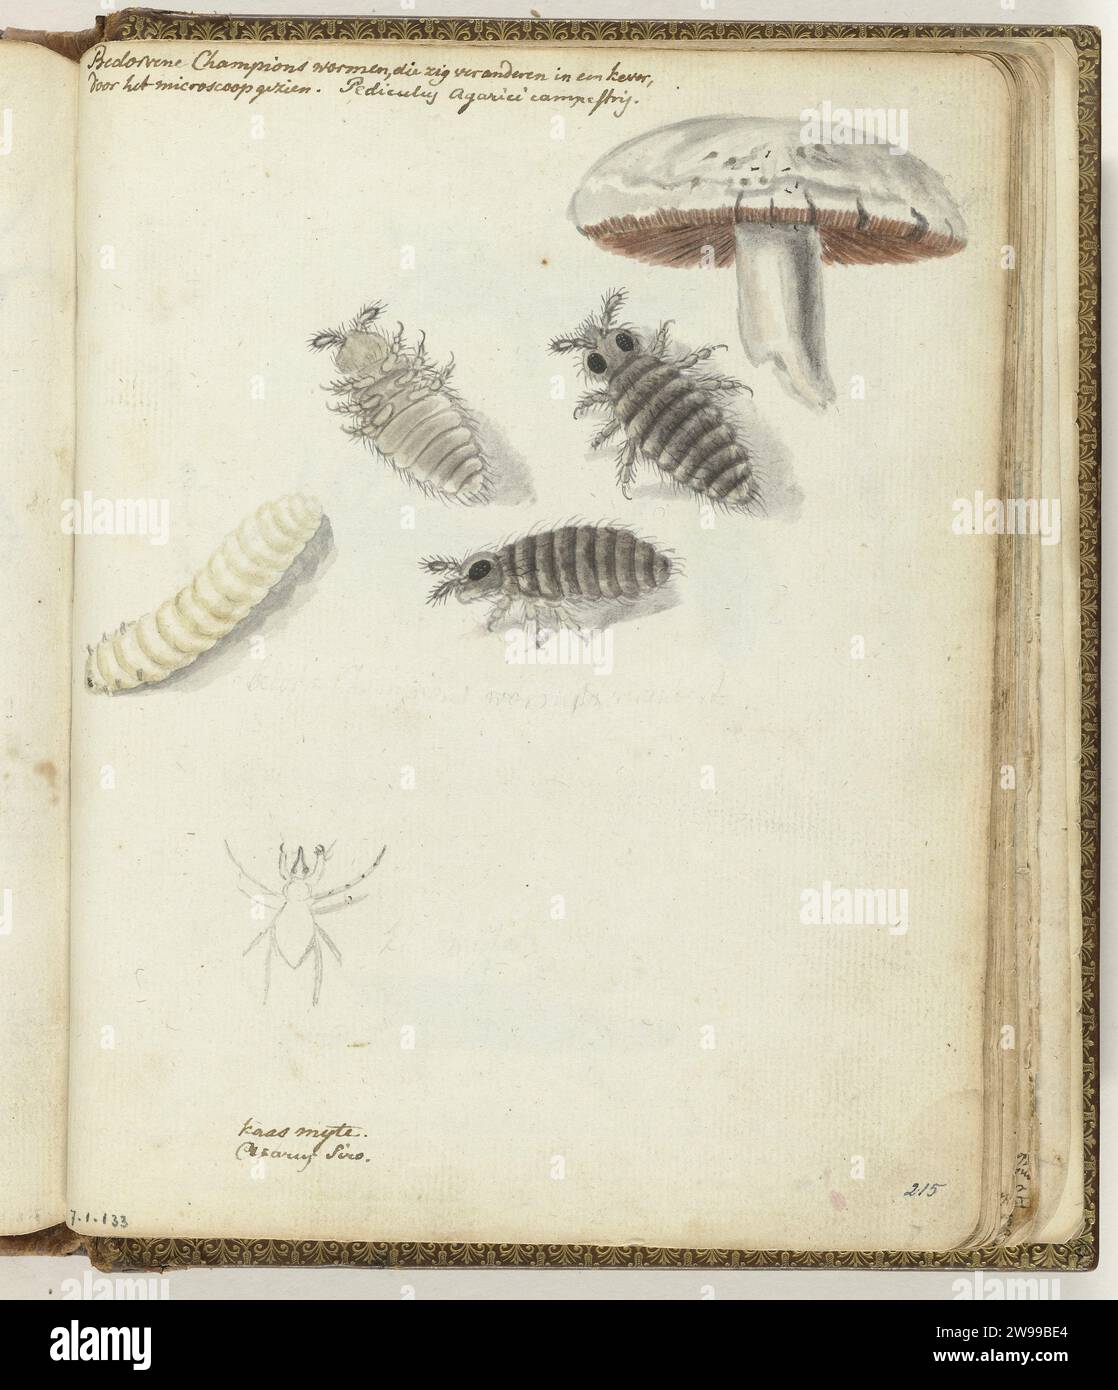 Mushrooms, Jan Brandes, 1770 - 1787 drawing Color drawing of a larva that houses in a mushroom in addition and various forms of the beetle that occurs from the Larf. Larf and Beetle seen through the Mikroscope. With inscription. Part of Jan Brandes' sketchbook, dl. 1 (1808), p. 215. Doetinchem paper. pencil. watercolor (paint) brush insects. mushrooms Stock Photo